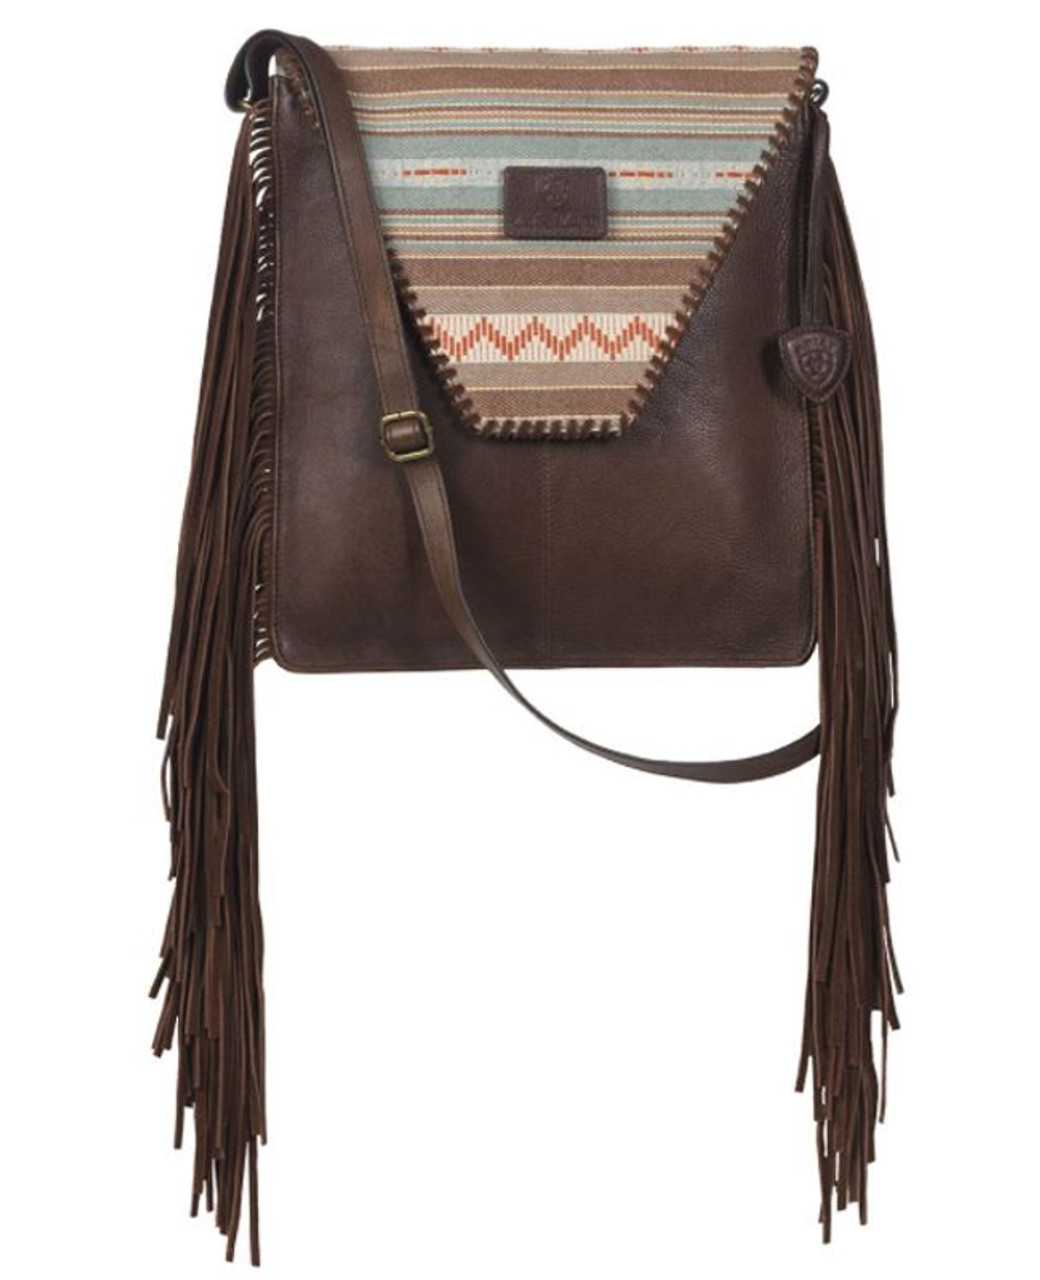 Serape Red, Yellow, Teal Wool Leather Handle Fringe Bag - Etsy New Zealand